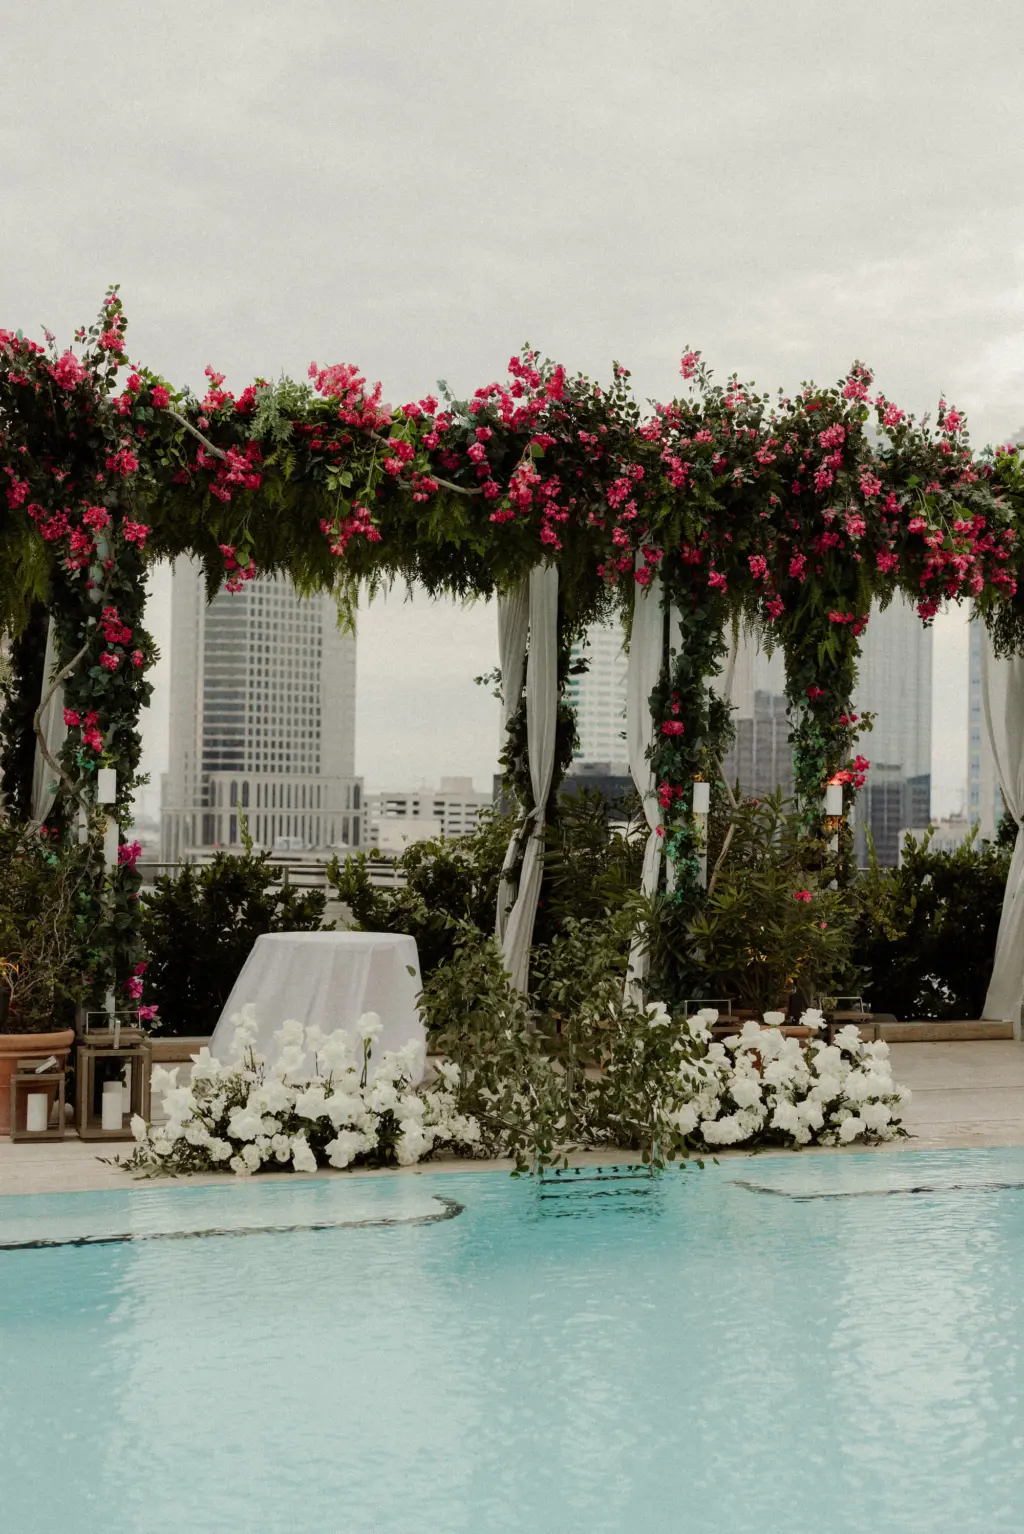 Bougainvillea Rooftop Pool Wedding Ceremony Arch Decor Ideas with White Roses and Greenery | Tampa Bay Planner Breezin Weddings | Downtown Tampa Event Venue The Edition Hotel